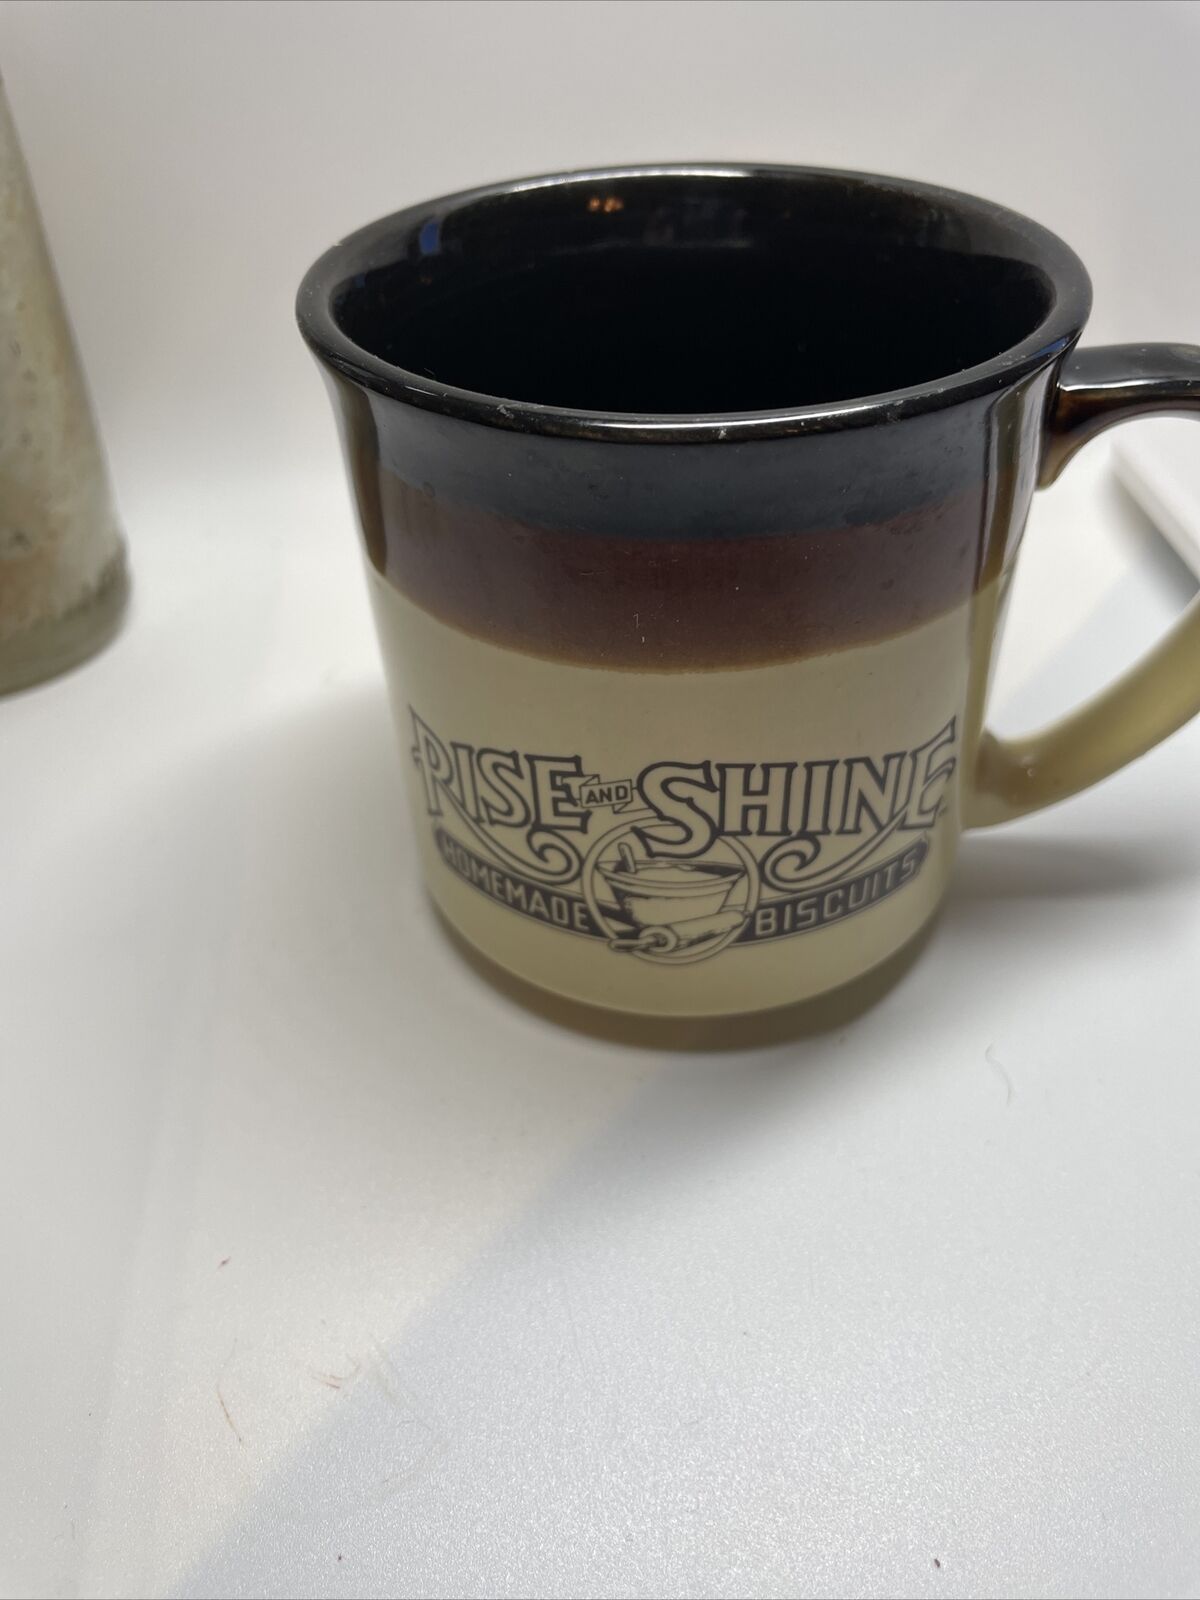 Vintage Hardee’s Rise and Shine Homemade Biscuits Mug 11 oz, 3.5” Tall  1986